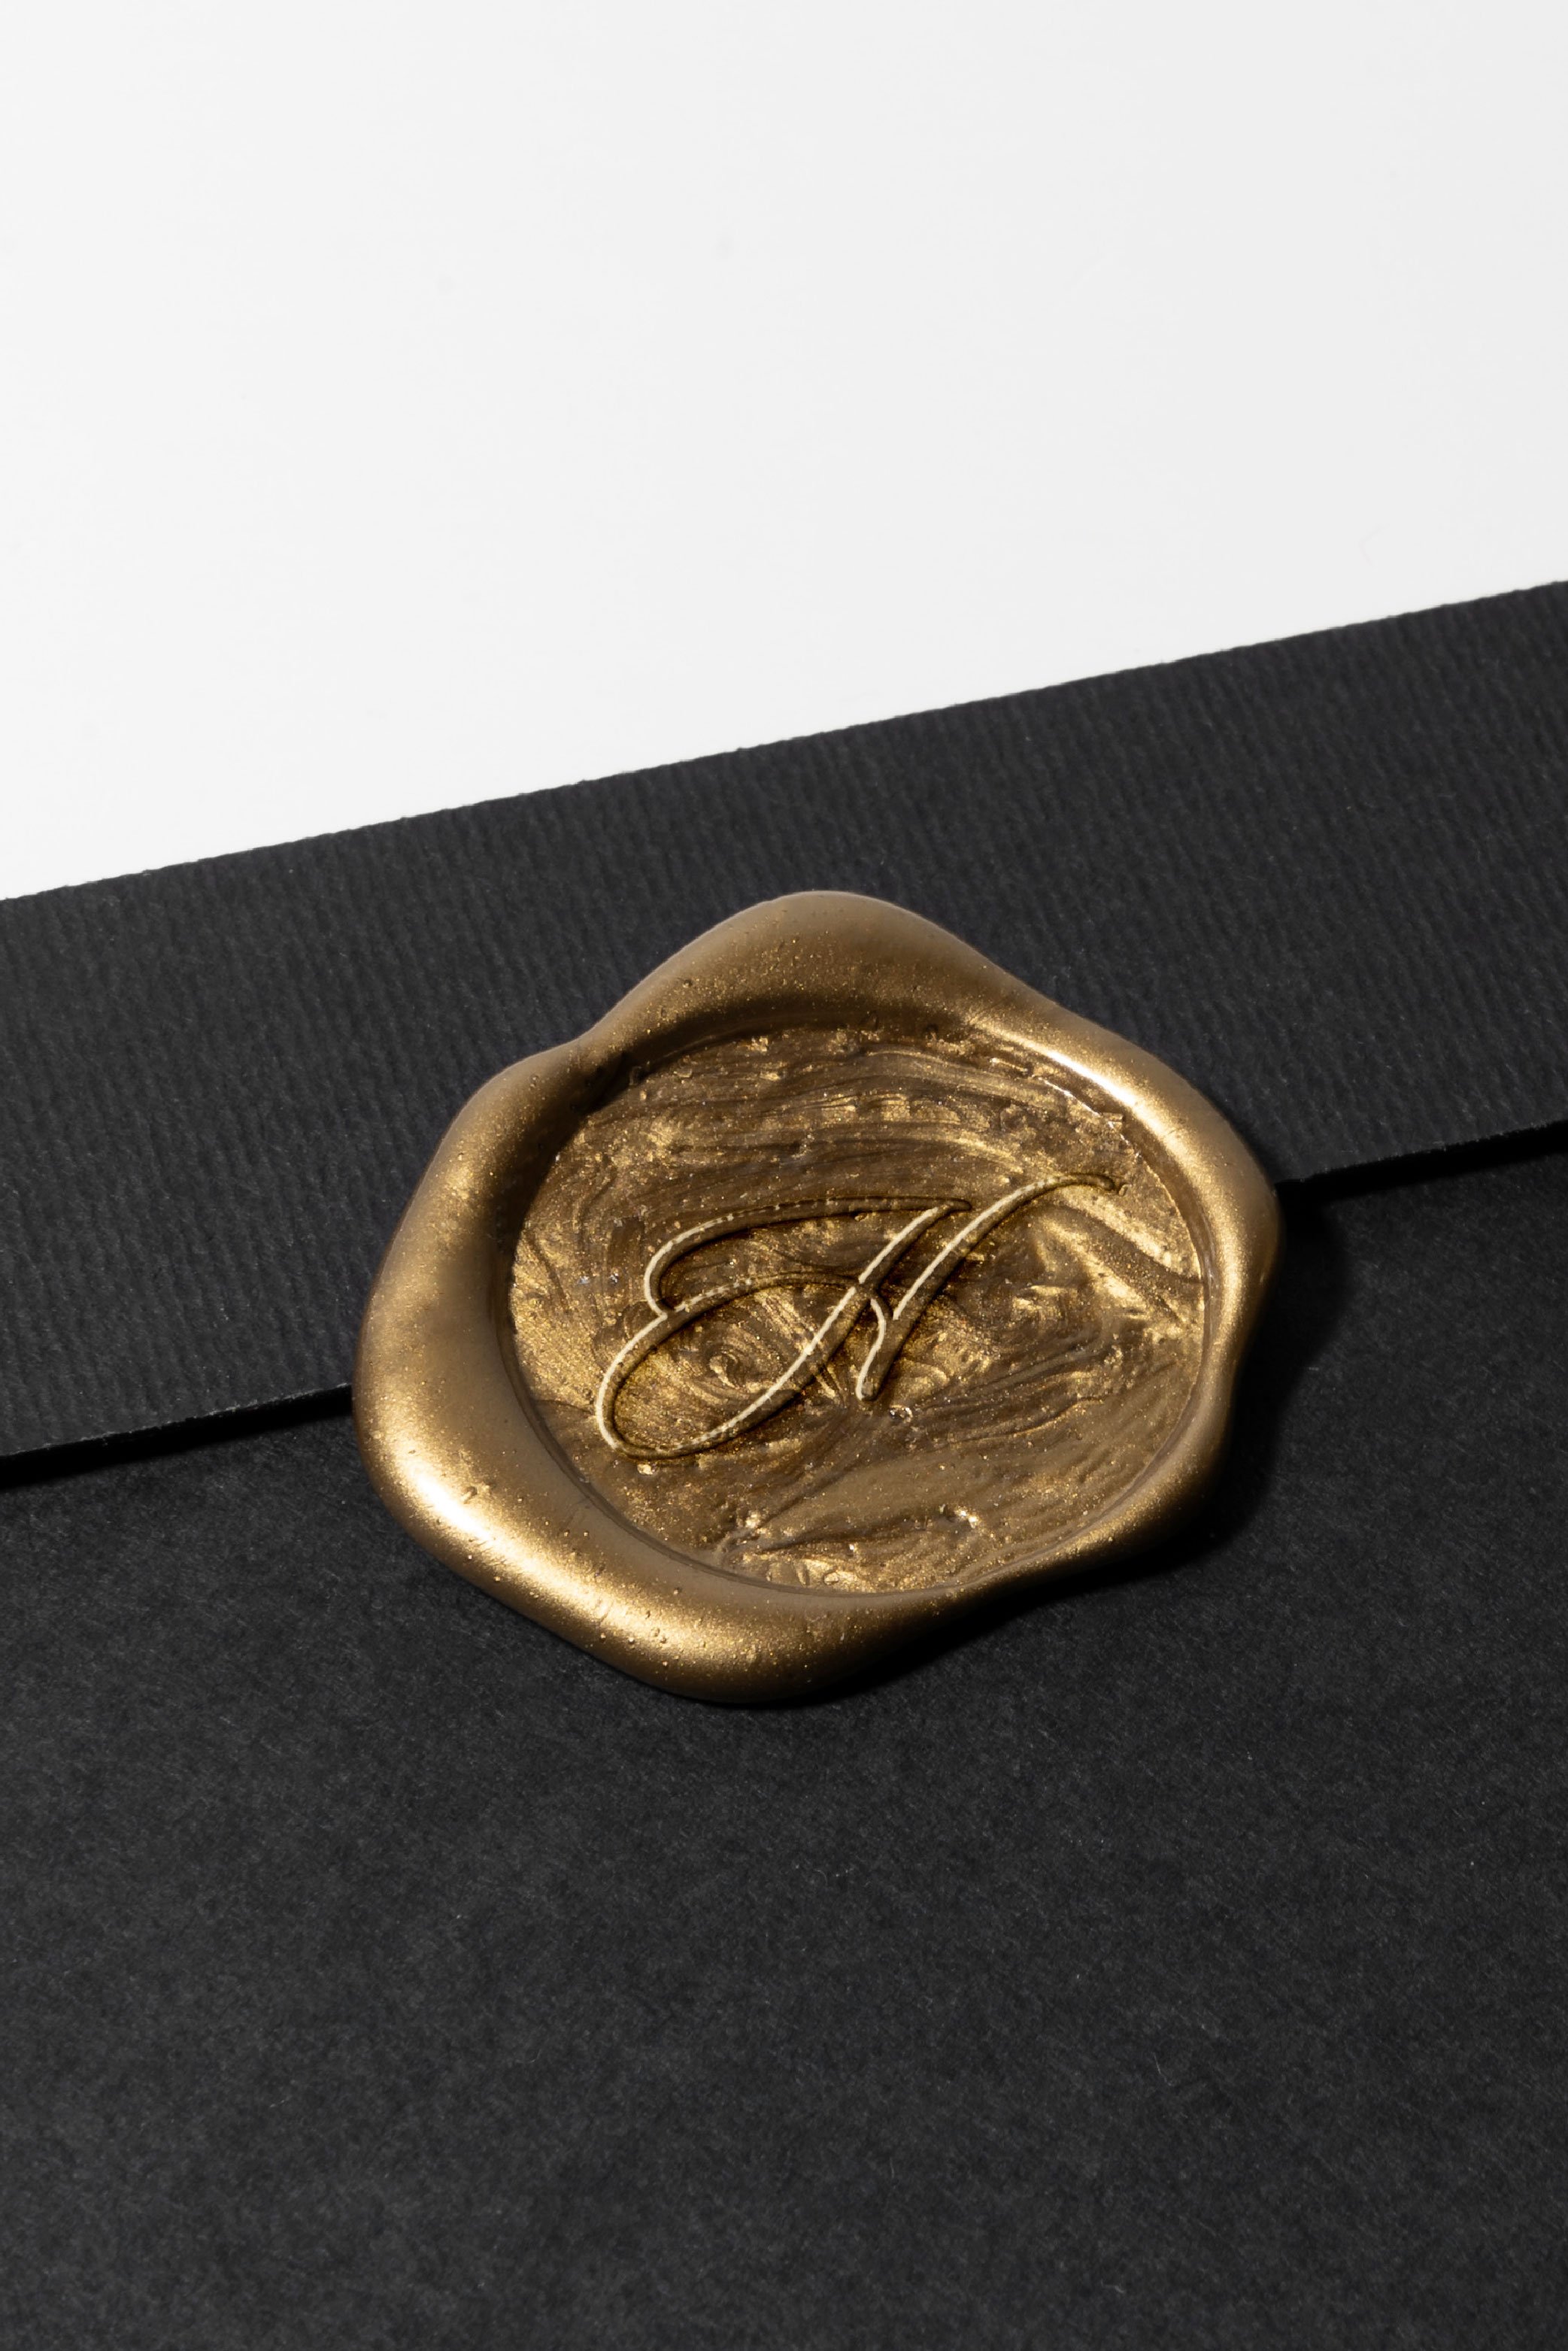  Wax seal with the emblem for Hearthside Event Center pressed into the wax. #montanagraphicdesigner #customlogos #logoandbranddesign #brandingservices #smallbusinessresources #hearthsideeventcenter 